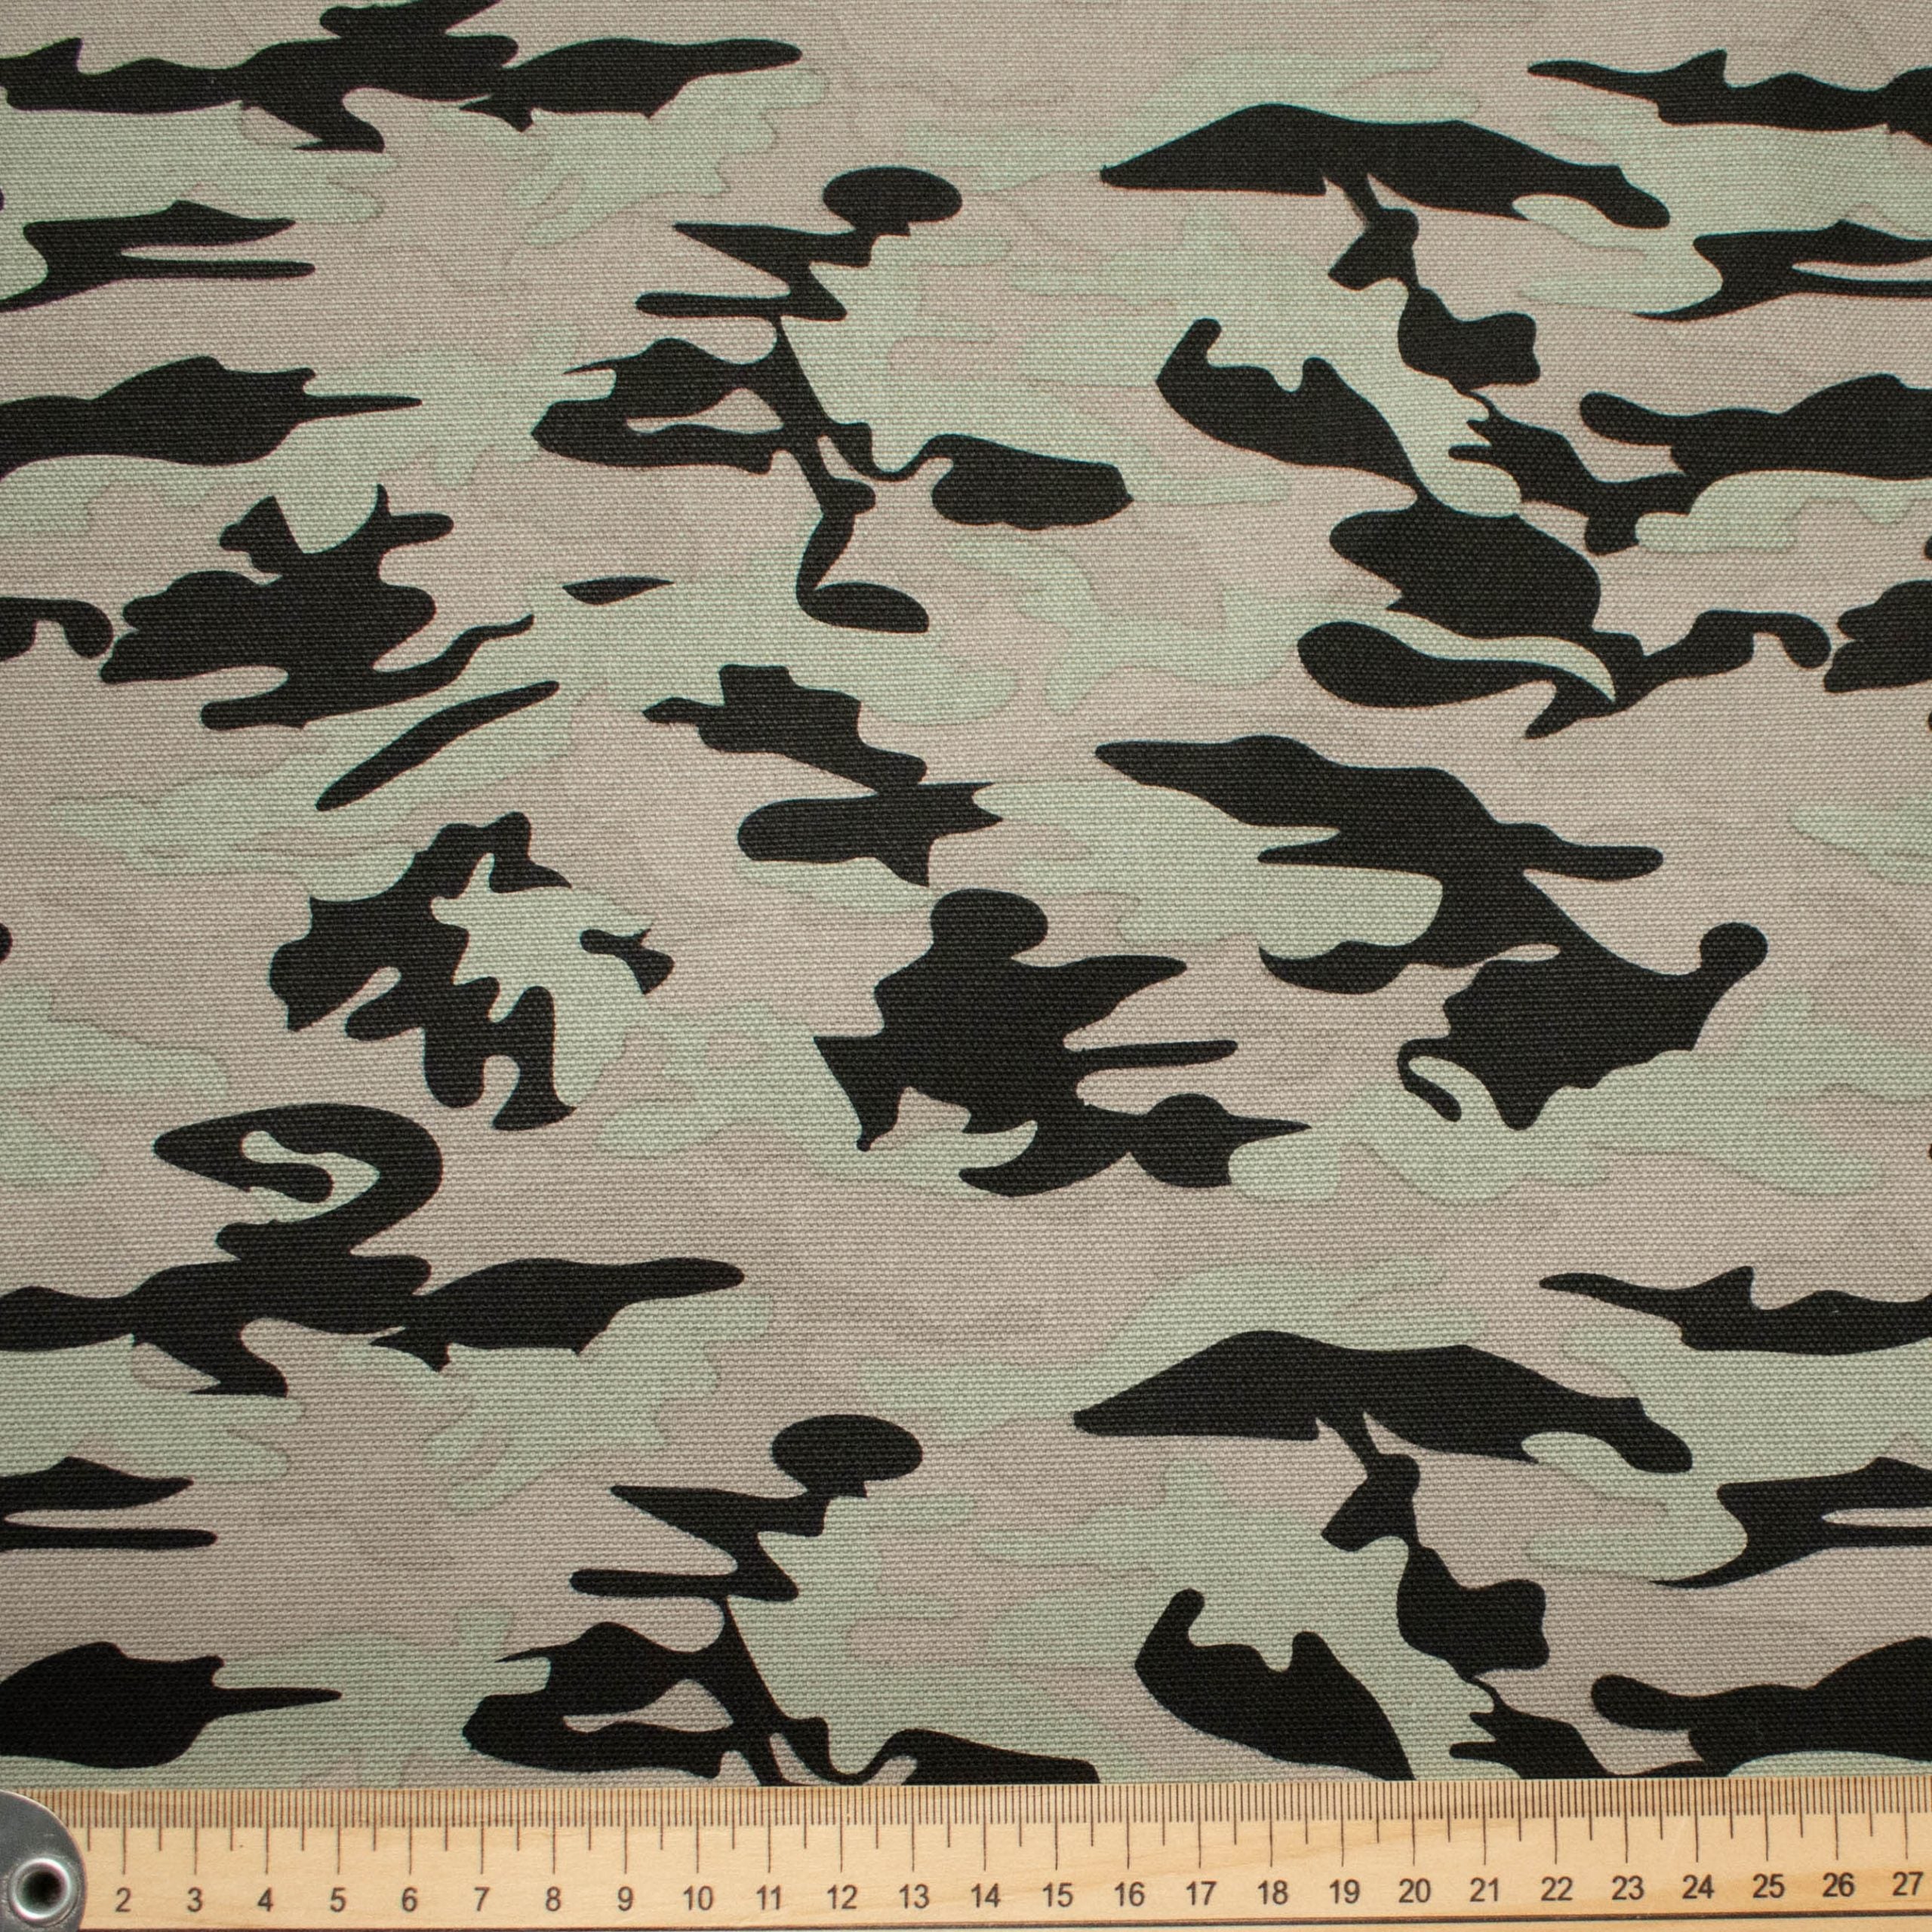 Pink Army Camouflage Camo Print Fabric Material Poly Cotton Stretch  Clothing